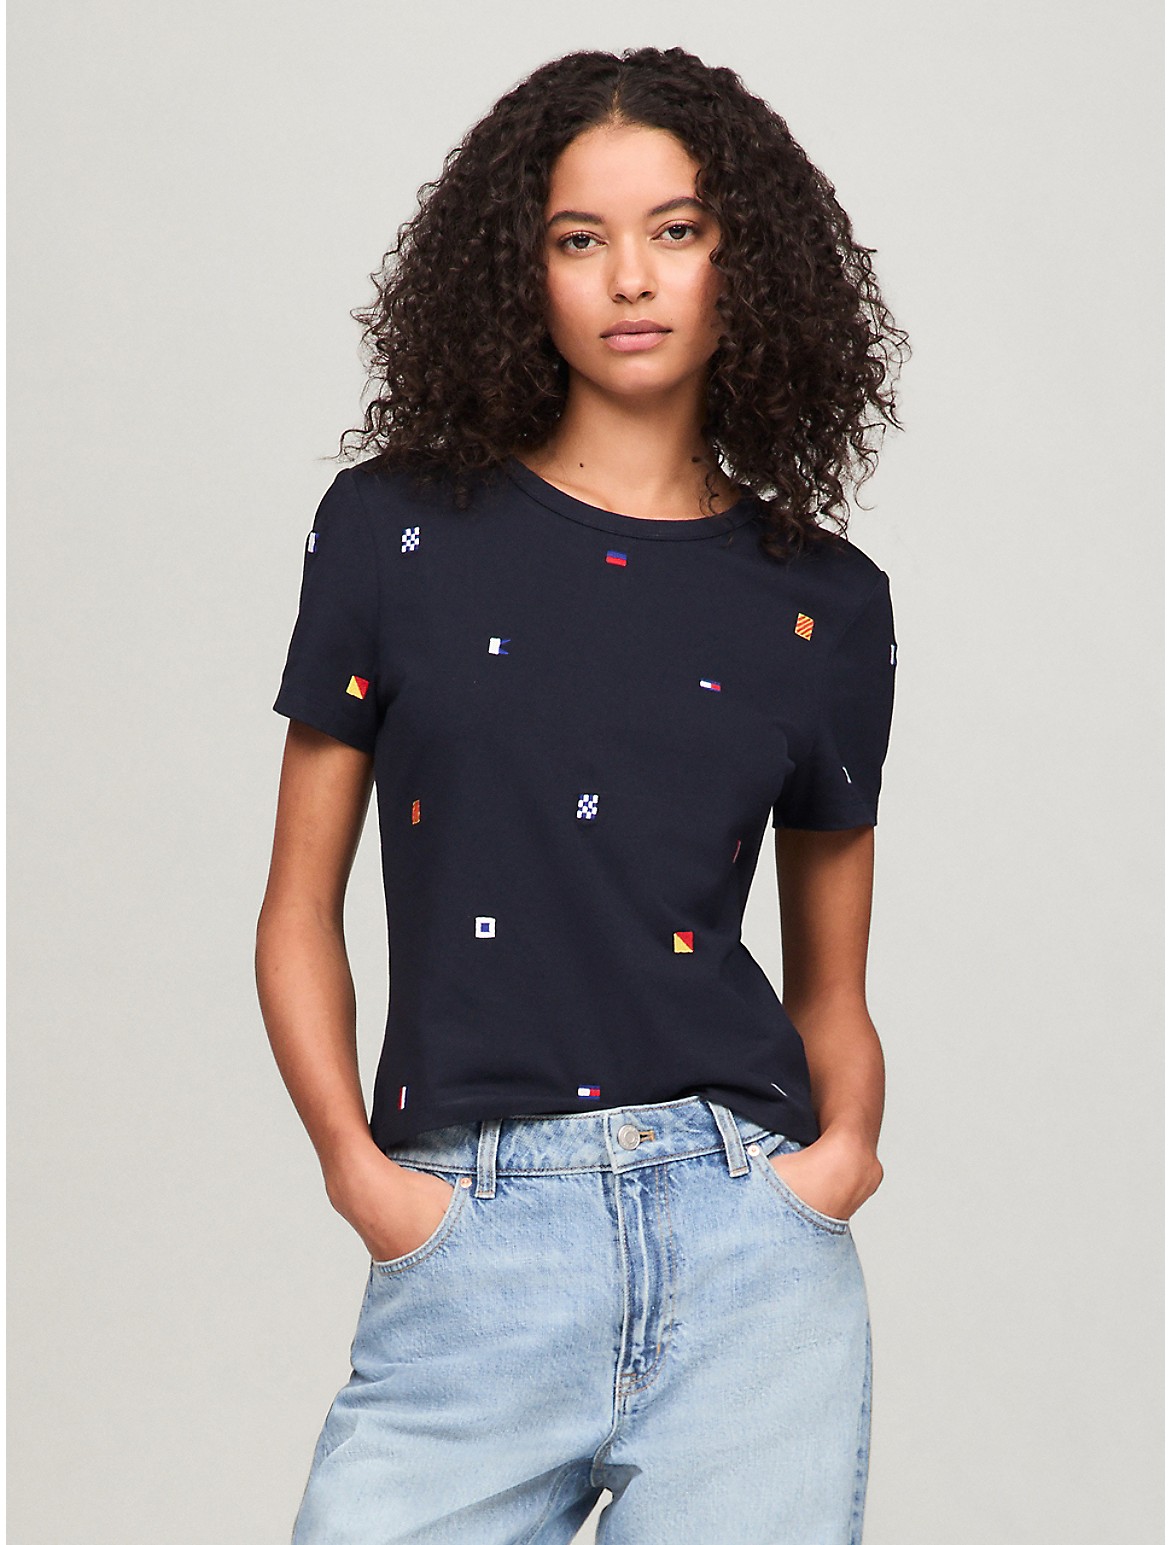 Tommy Hilfiger Women's Embroidered Allover Flag T-Shirt